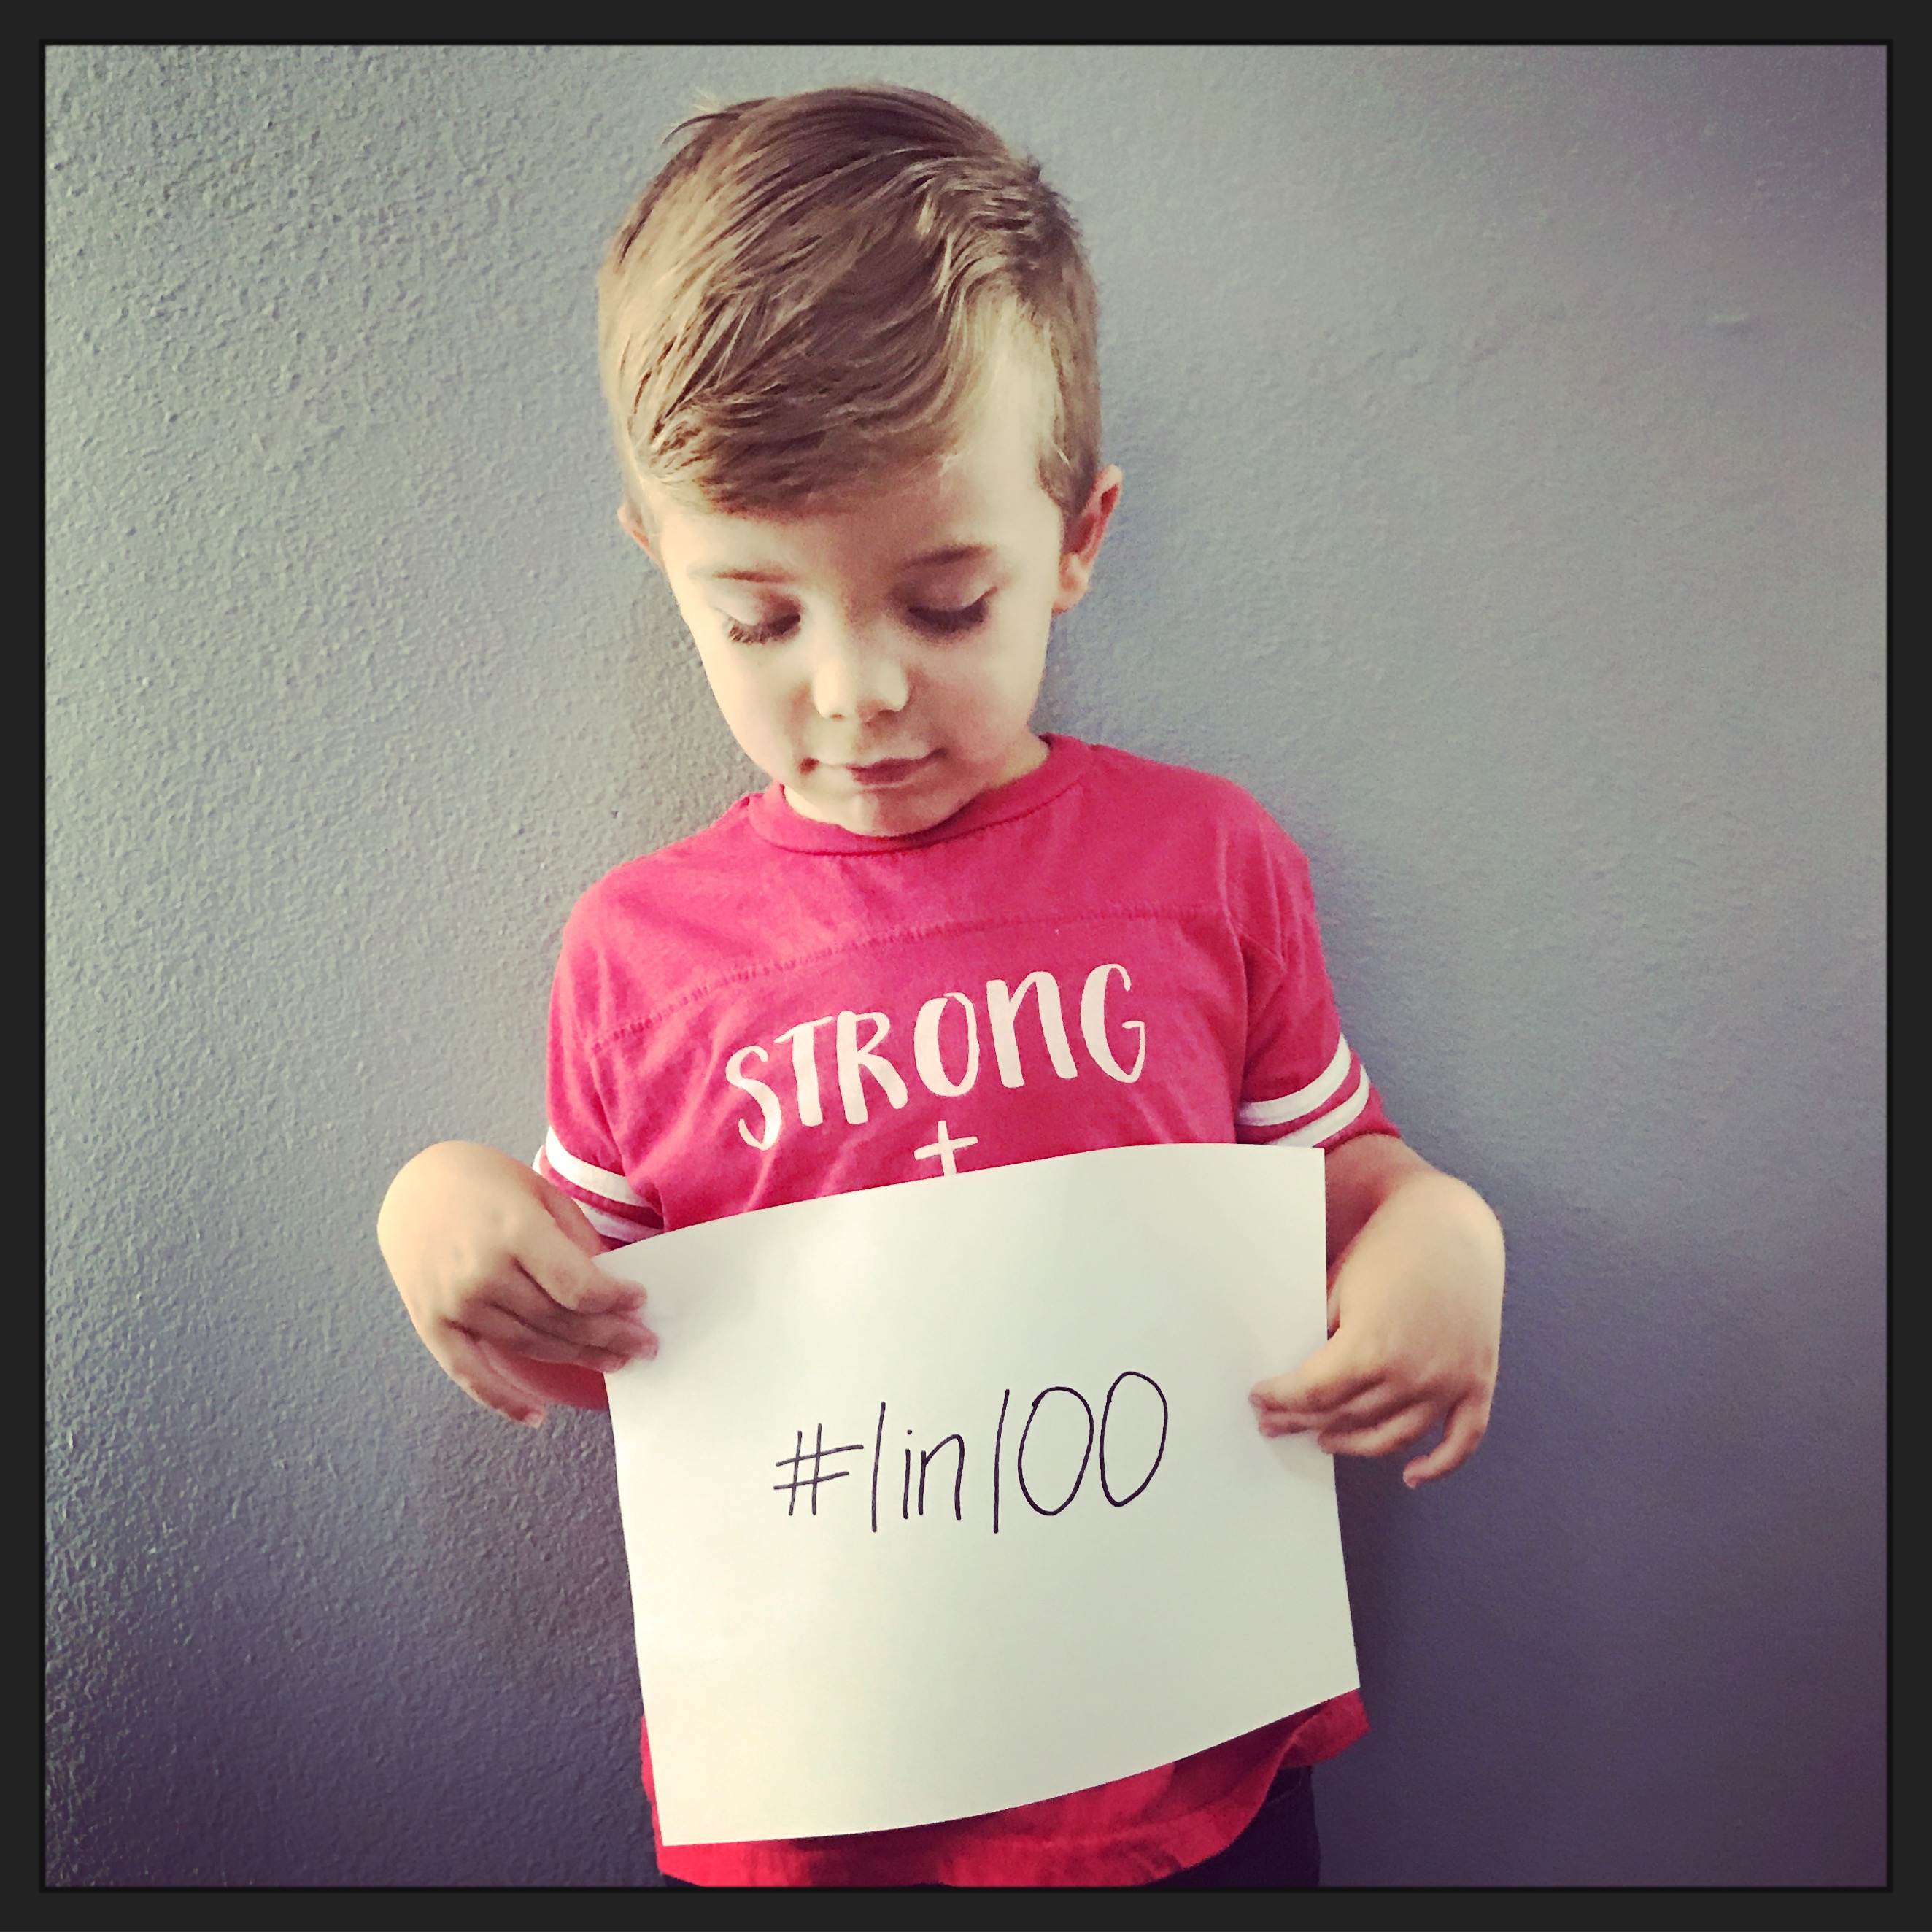 The author's son, holding a sign that says [hashtag] 1 in 100 